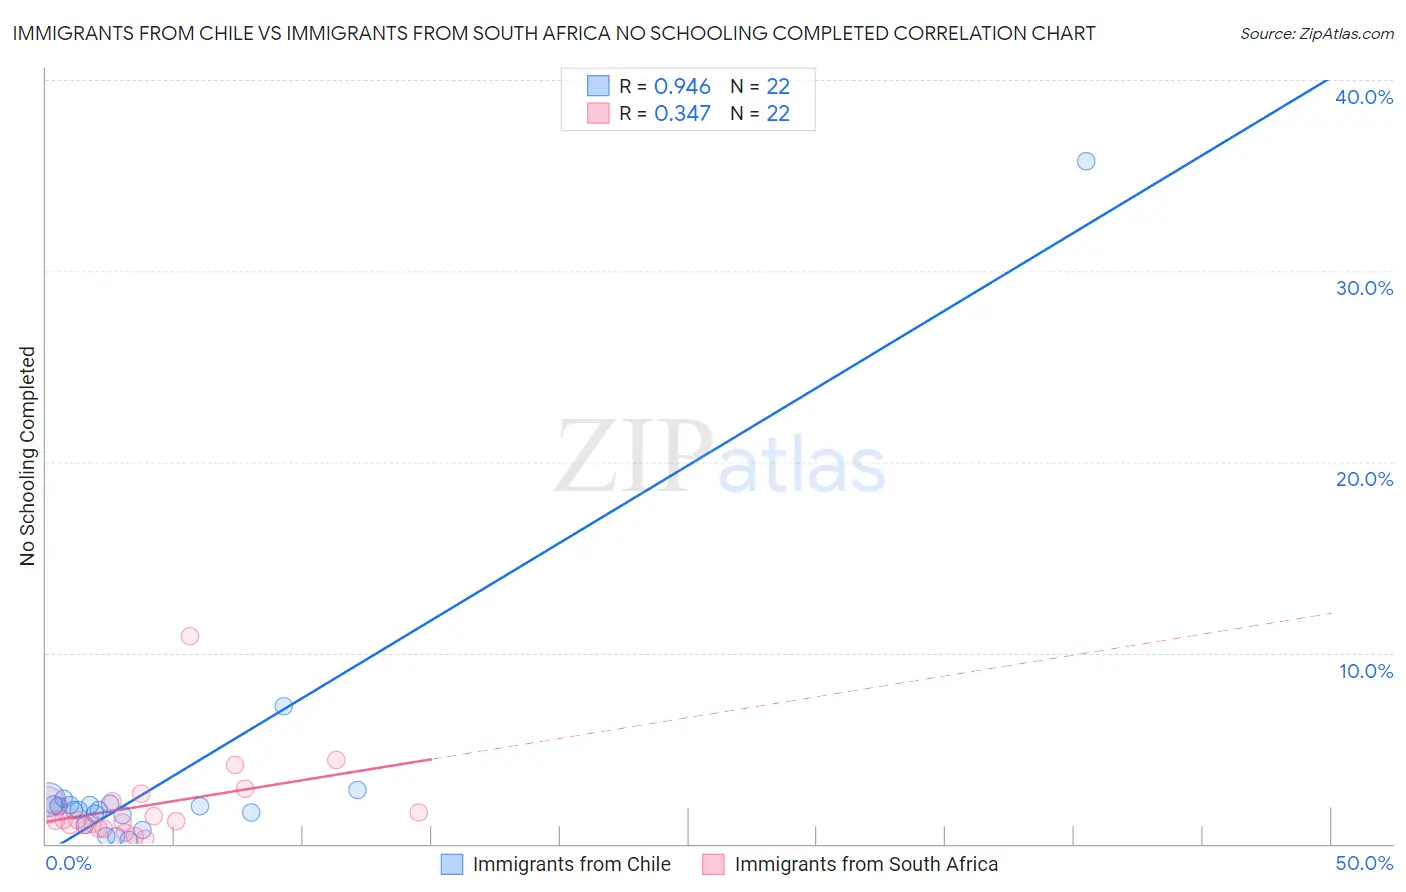 Immigrants from Chile vs Immigrants from South Africa No Schooling Completed